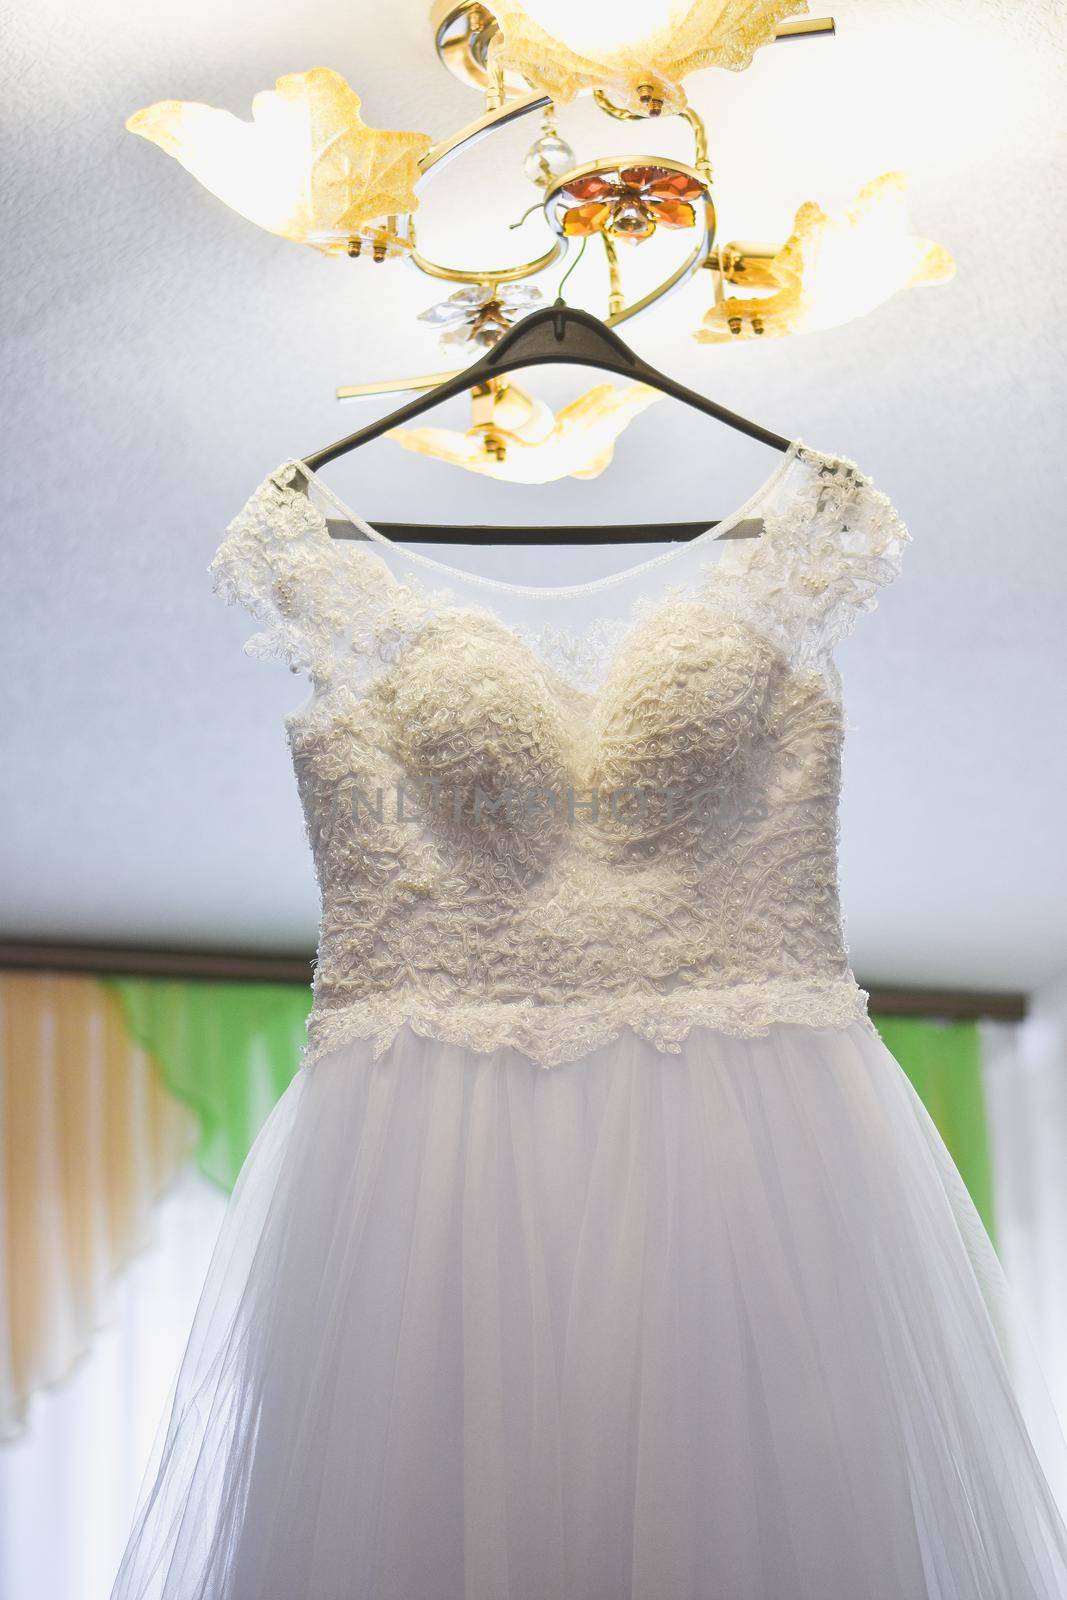 The wedding dress hangs on the chandelier. In the home environment. Without people. Vertical photo.